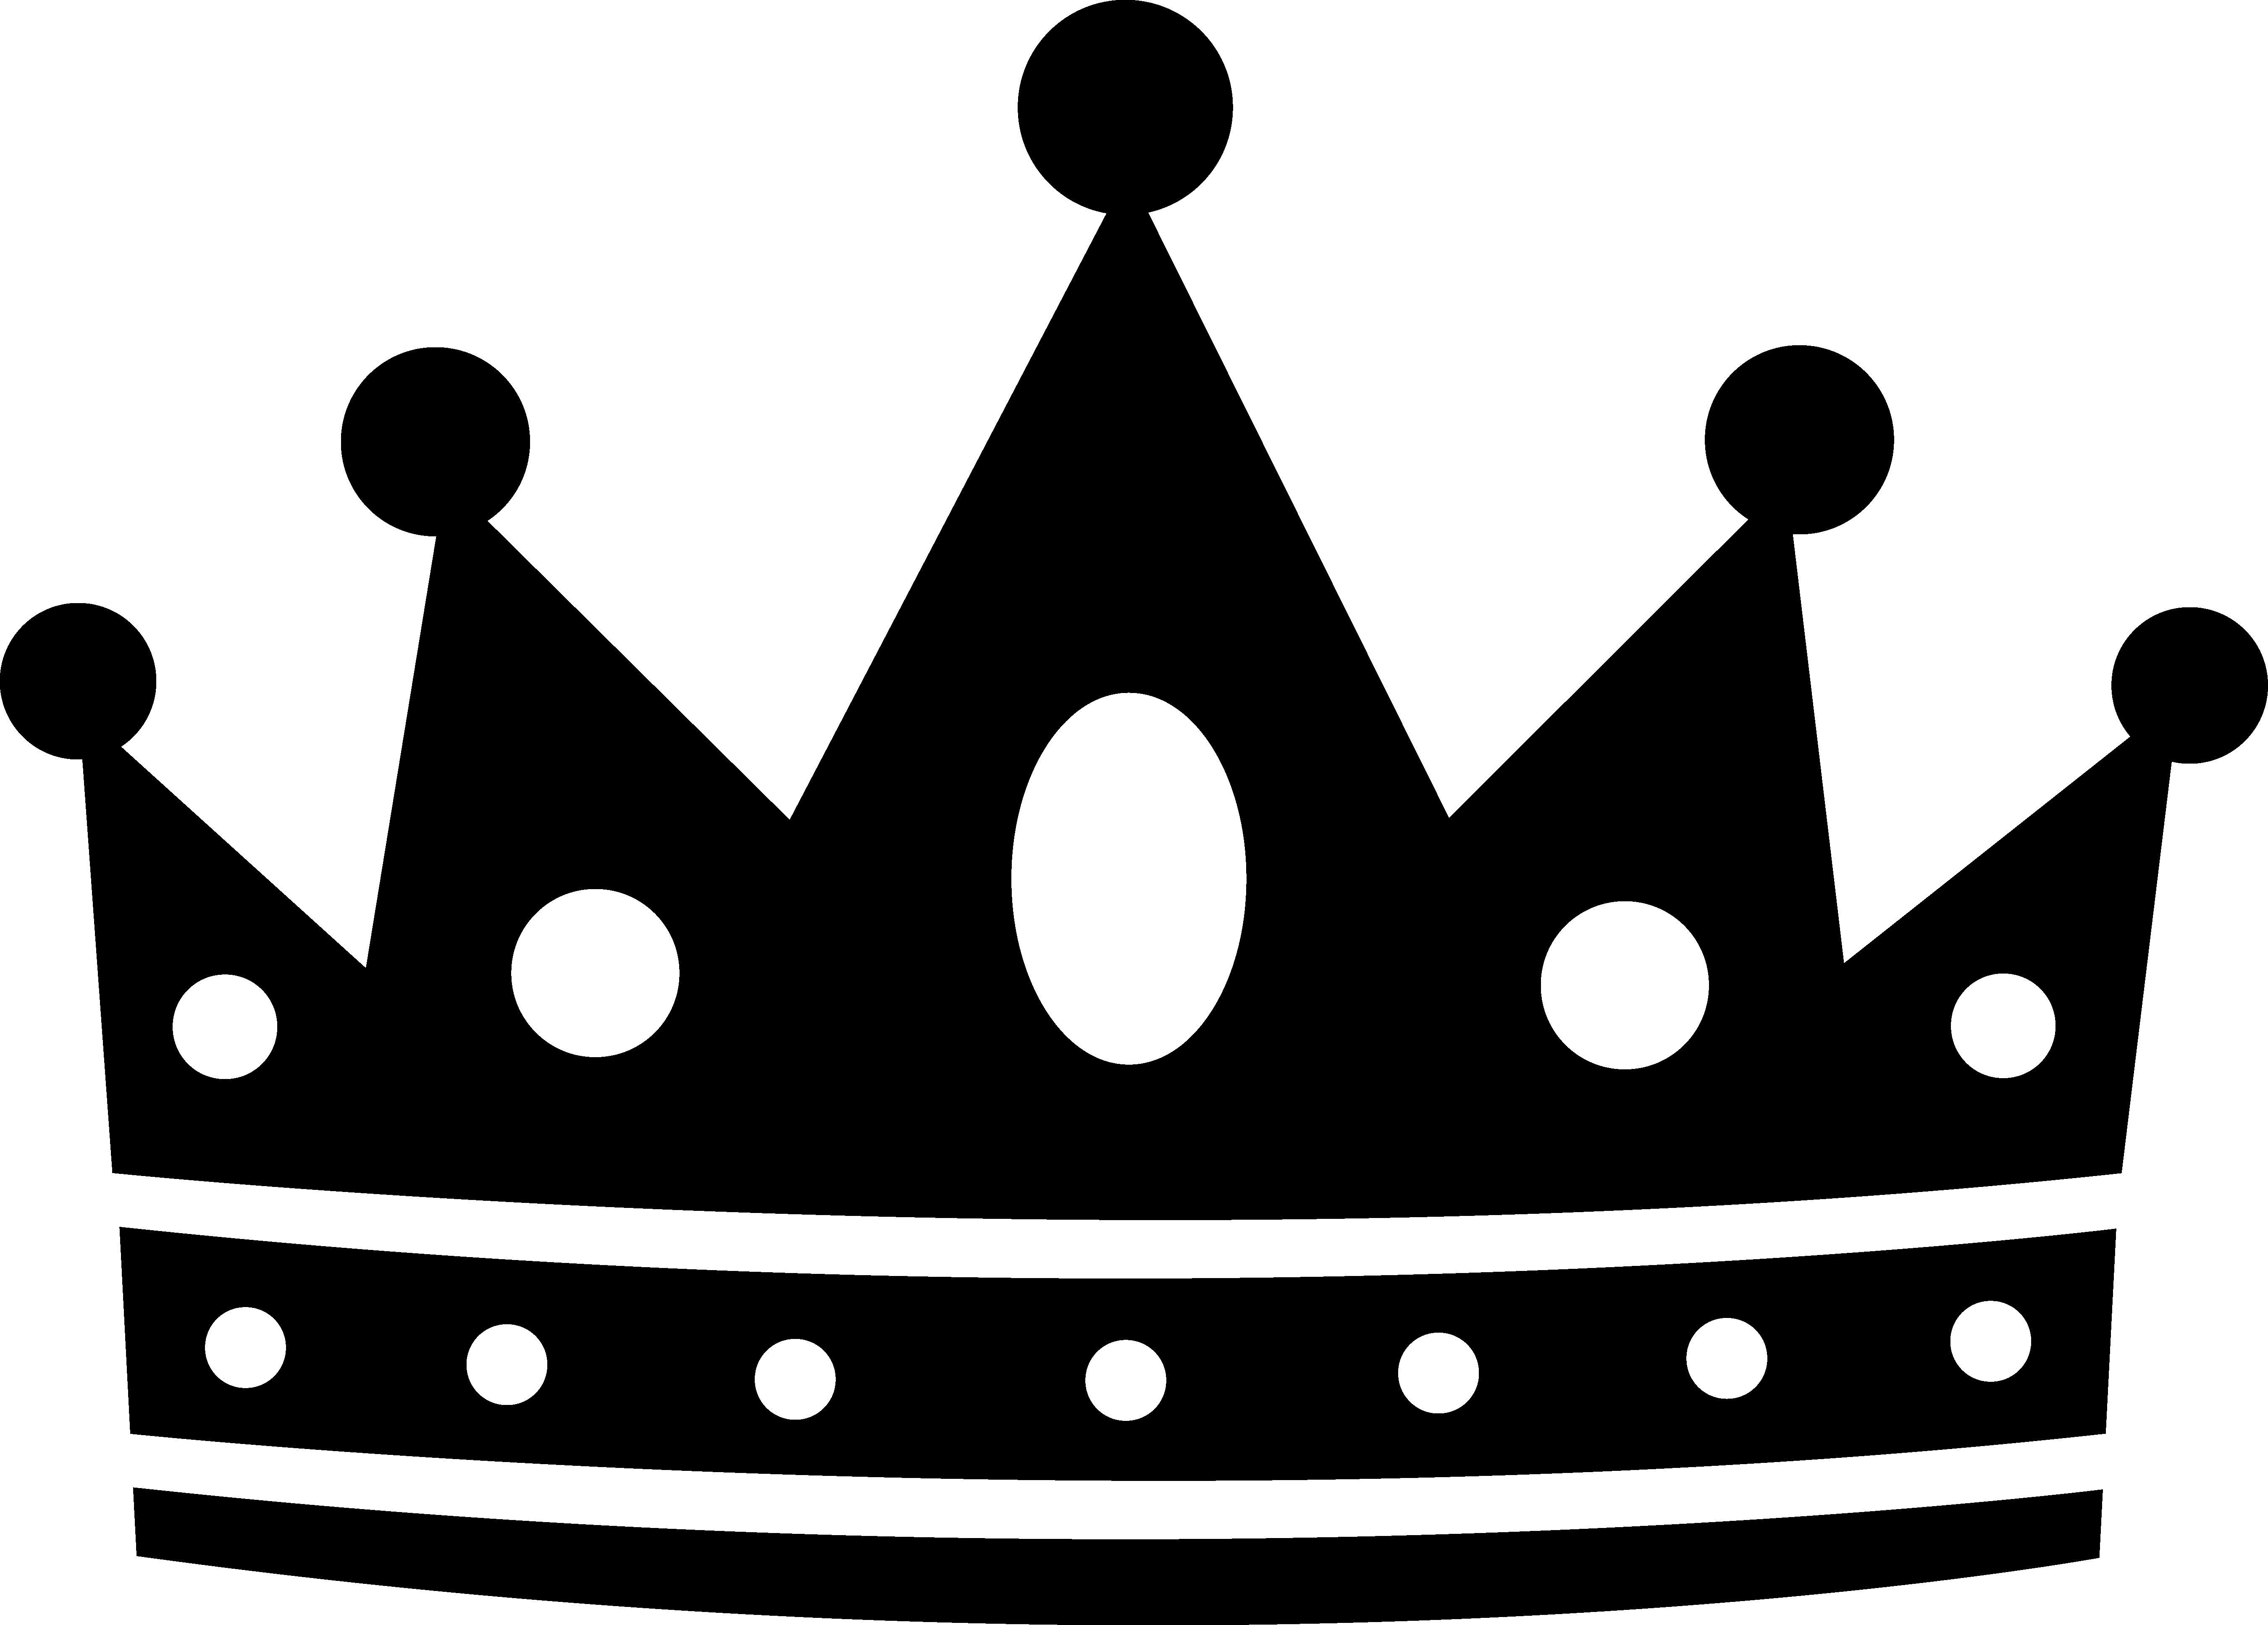 Kings Crown Template Clipart